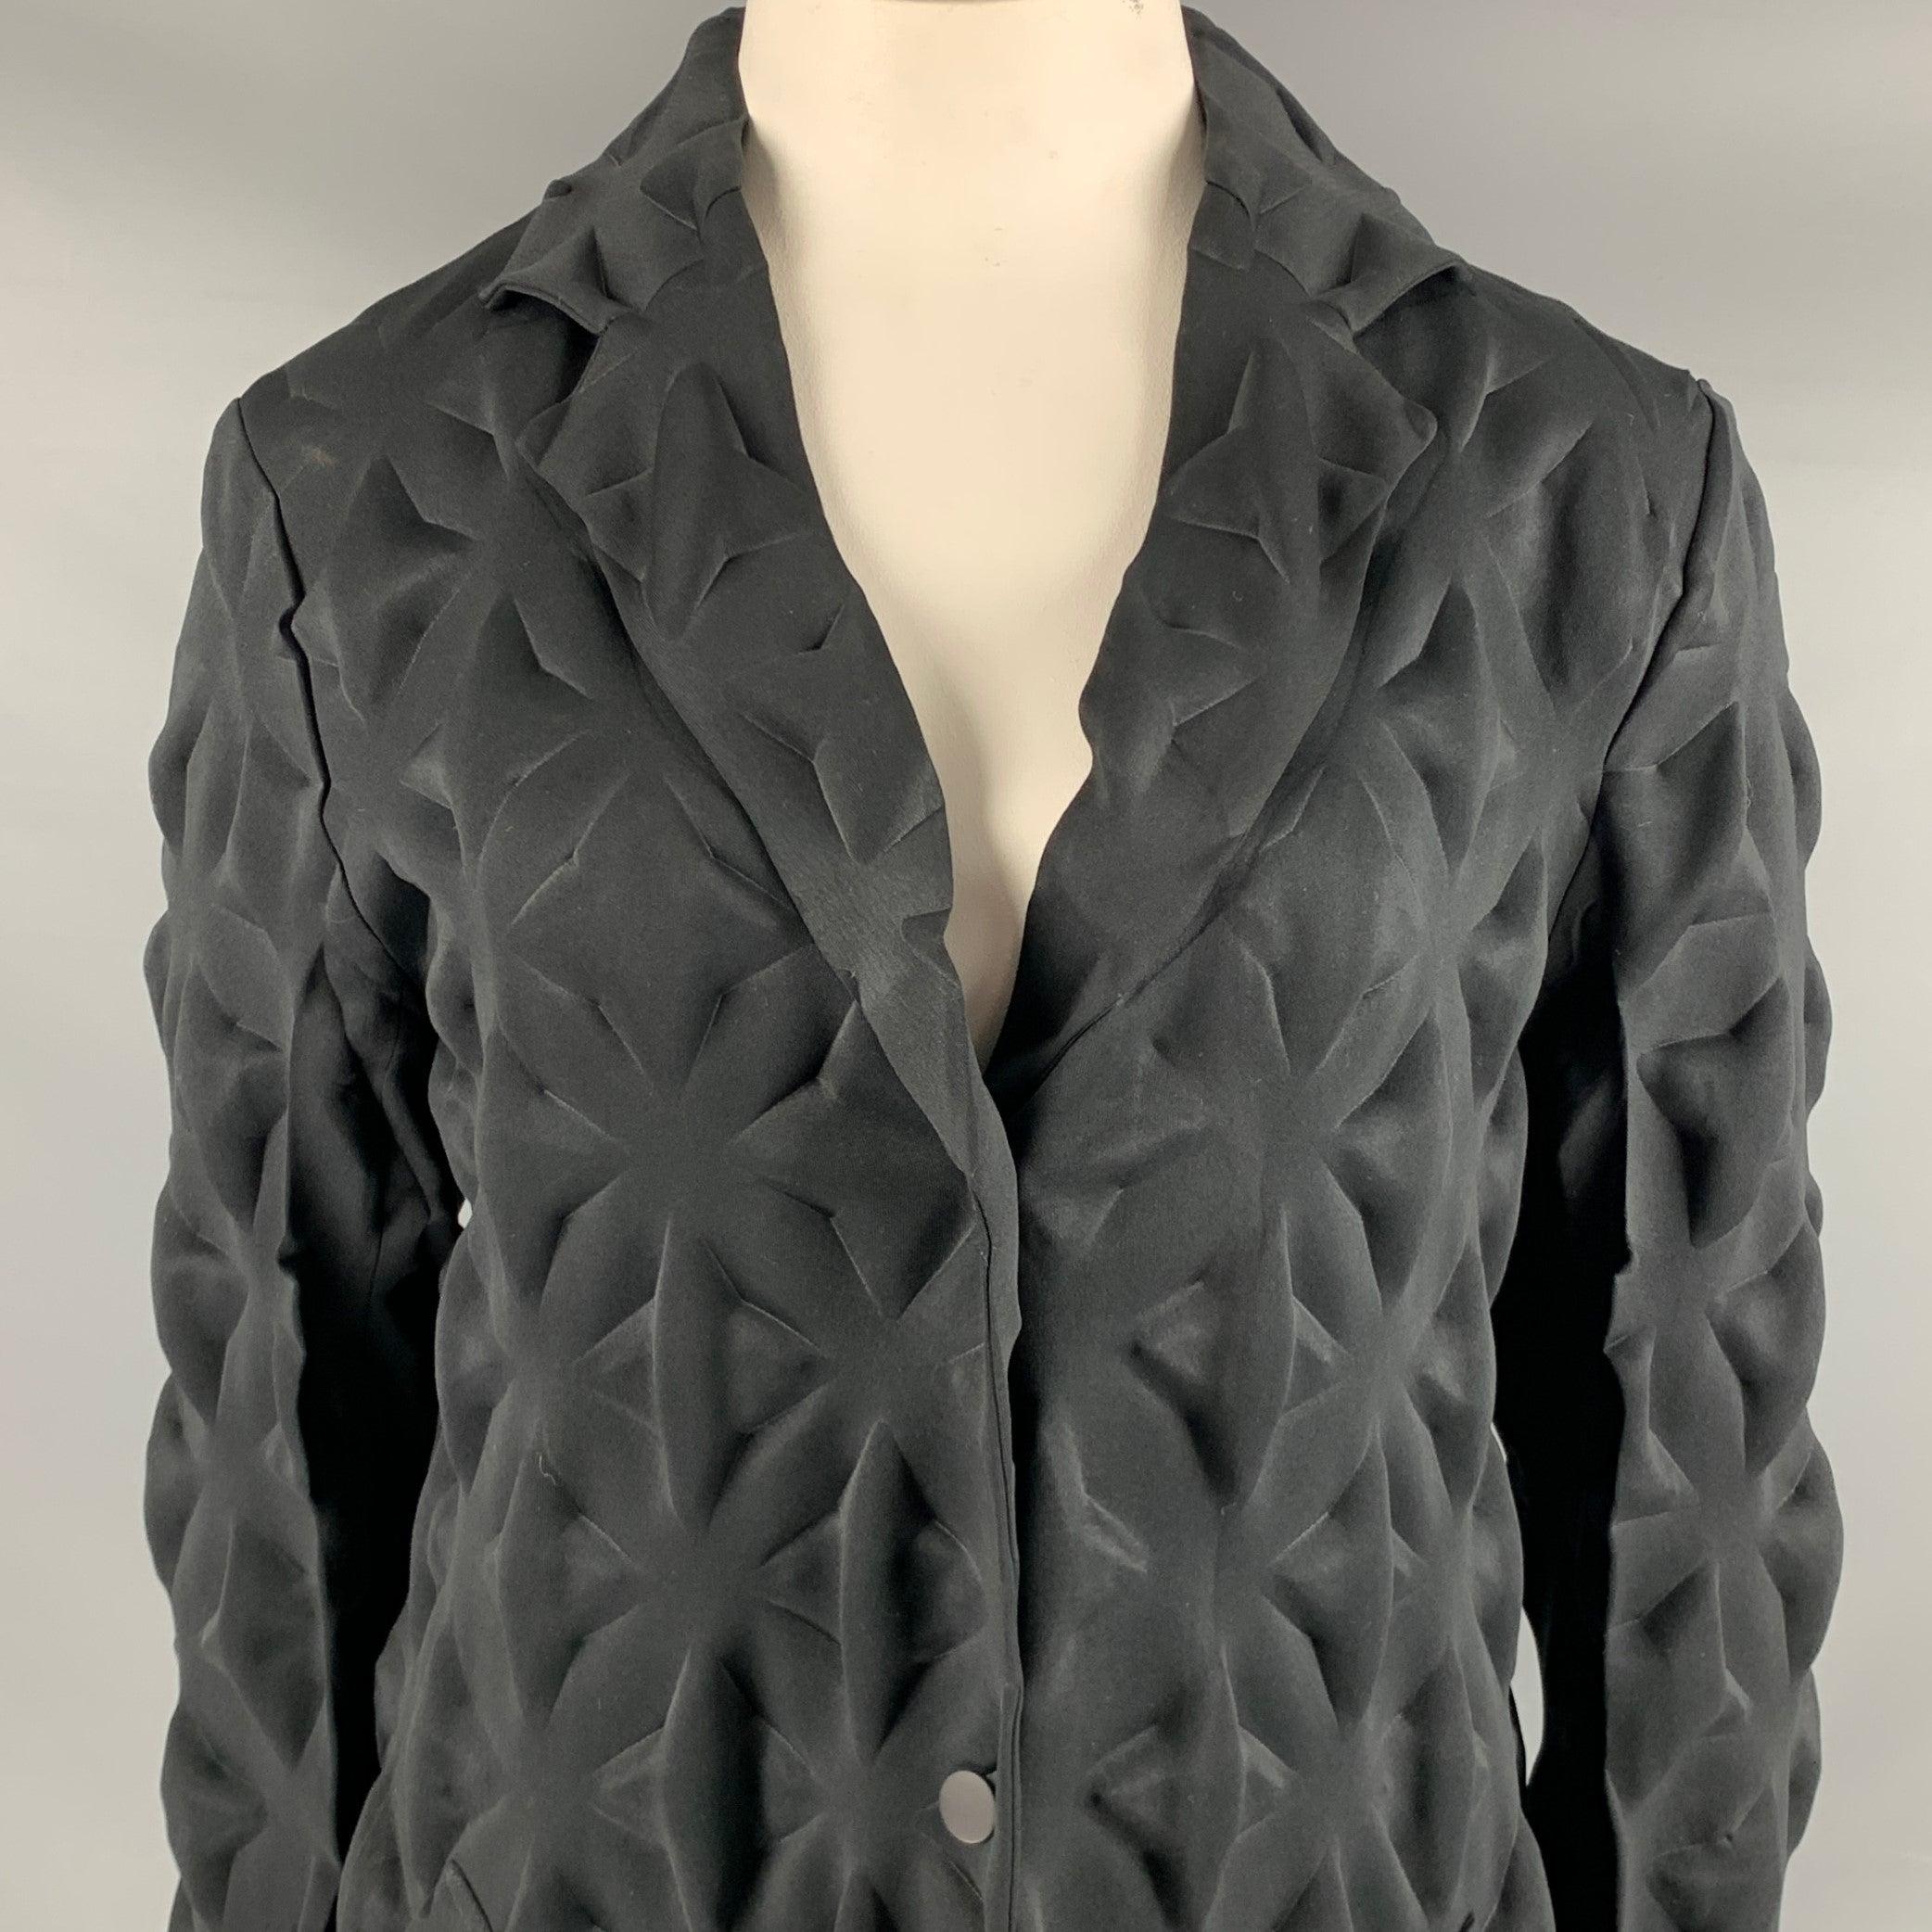 ISSEY MIYAKE coat
in a black polyester fabric featuring dramatic long length, stunning embossed star pattern, and snap closure. Made in Japan.Very Good Pre-Owned Condition. Minor marks. 

Marked:   JP 4 

Measurements: 
 
Shoulder: 17 inches Bust: